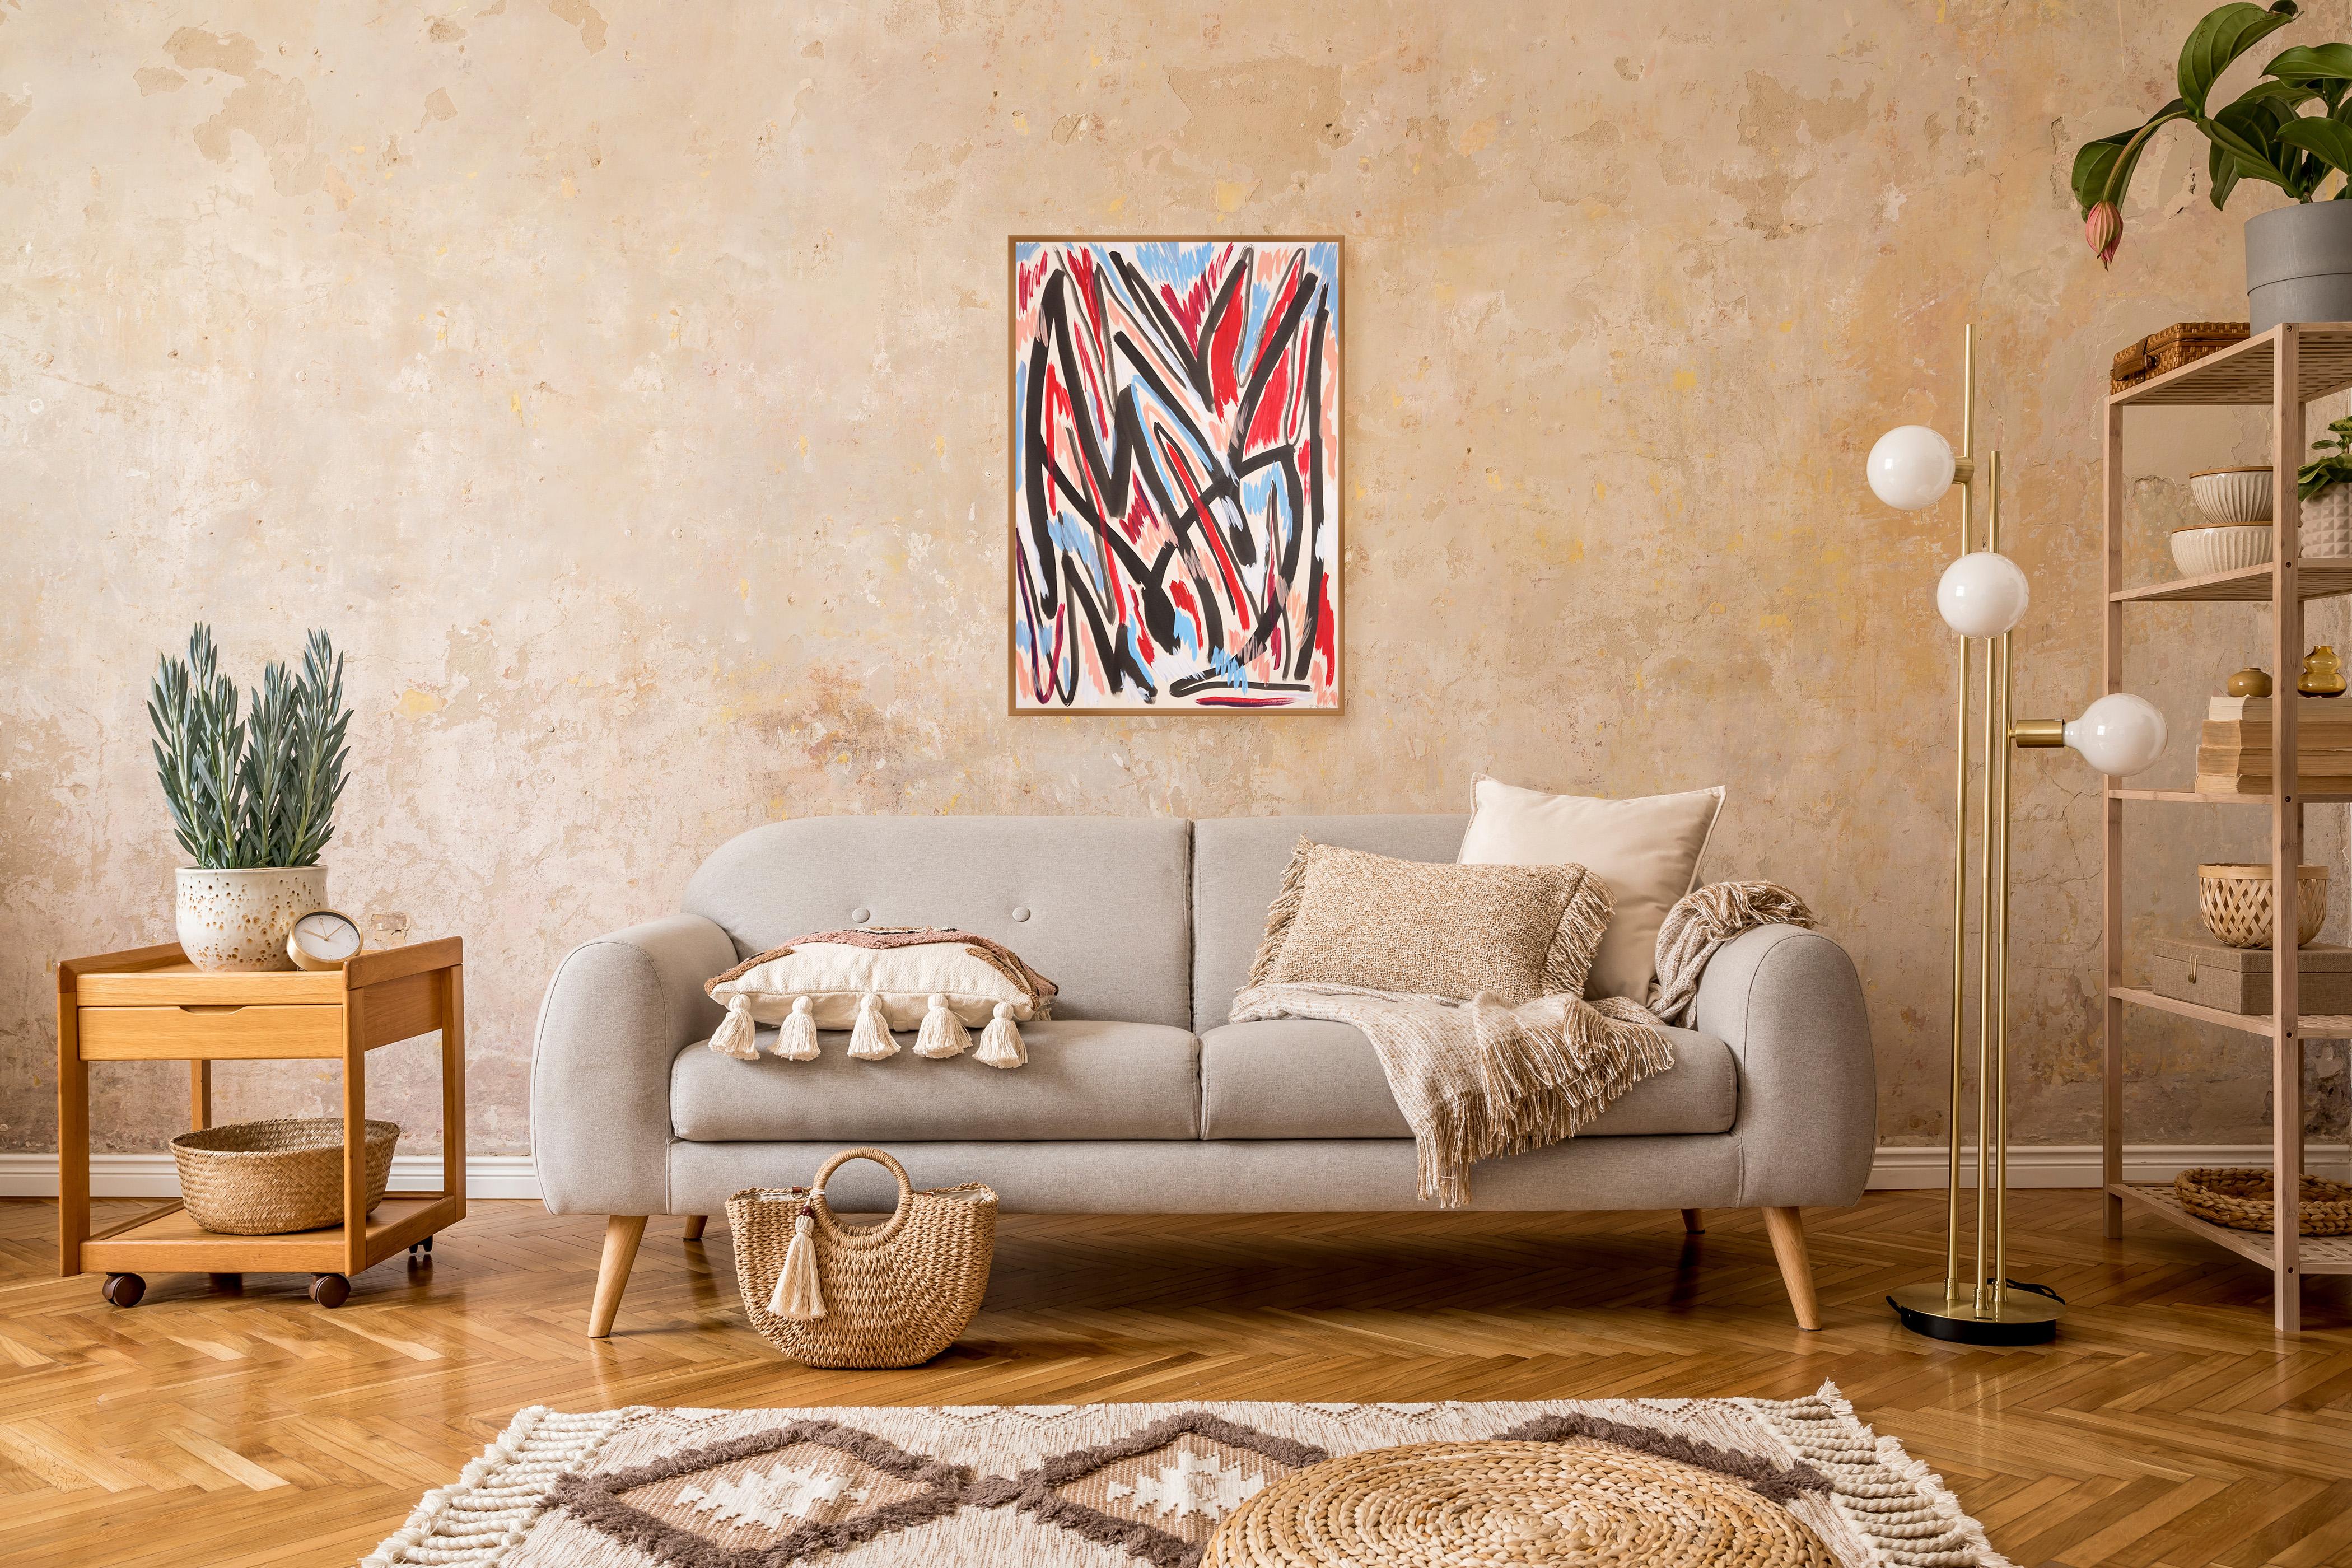 Changing Seasons, Abstract Expressionist Style in Red and Blue, Black Gestures For Sale 1